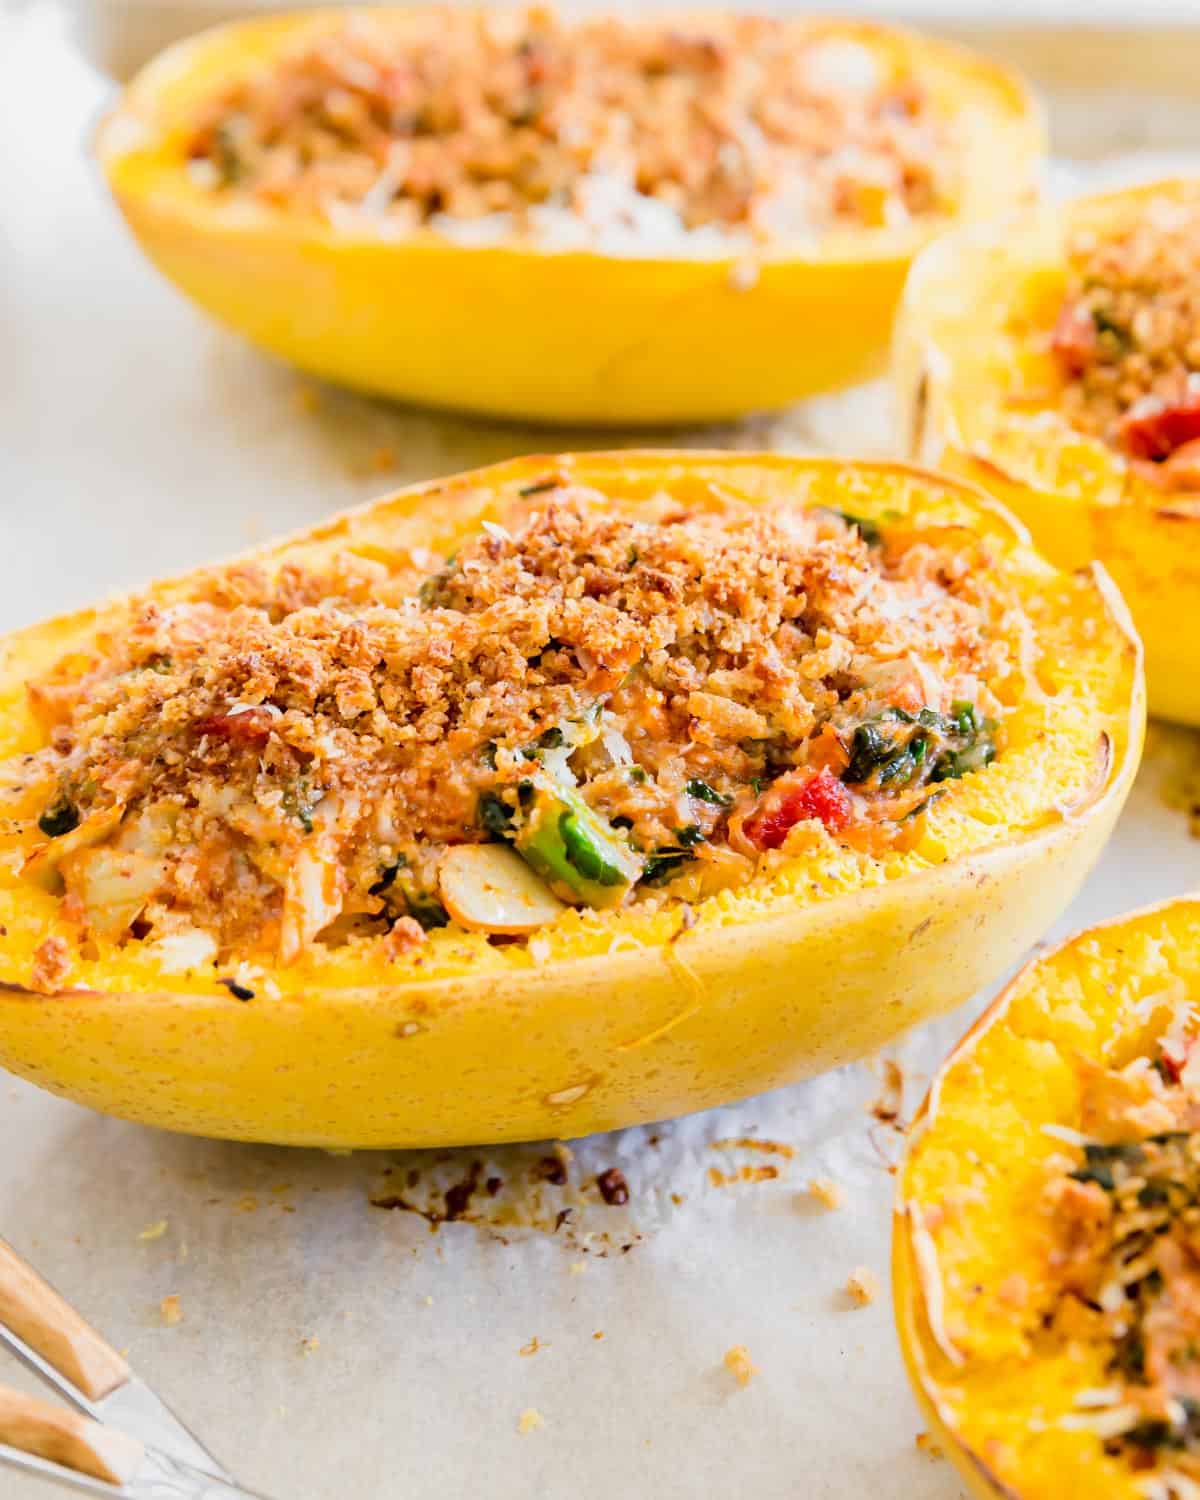 twice baked spaghetti squash stuffed with canned artichokes, chopped spinach, sun-dried tomatoes, cheese and breadcrumbs